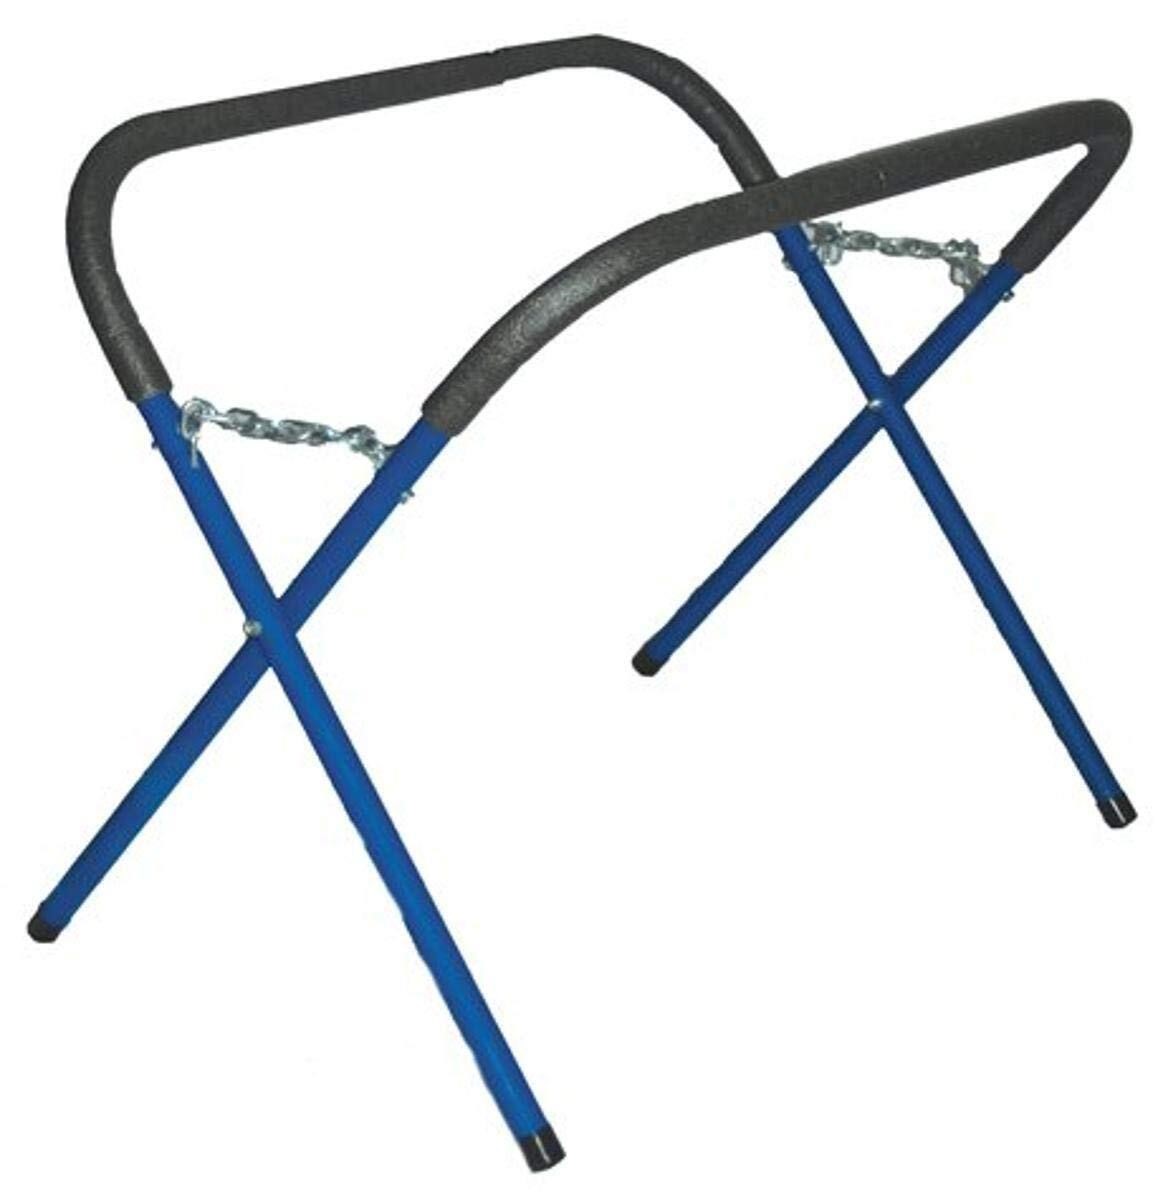 ATD Tools 7811 Work Stand - 500 lb. Capacity